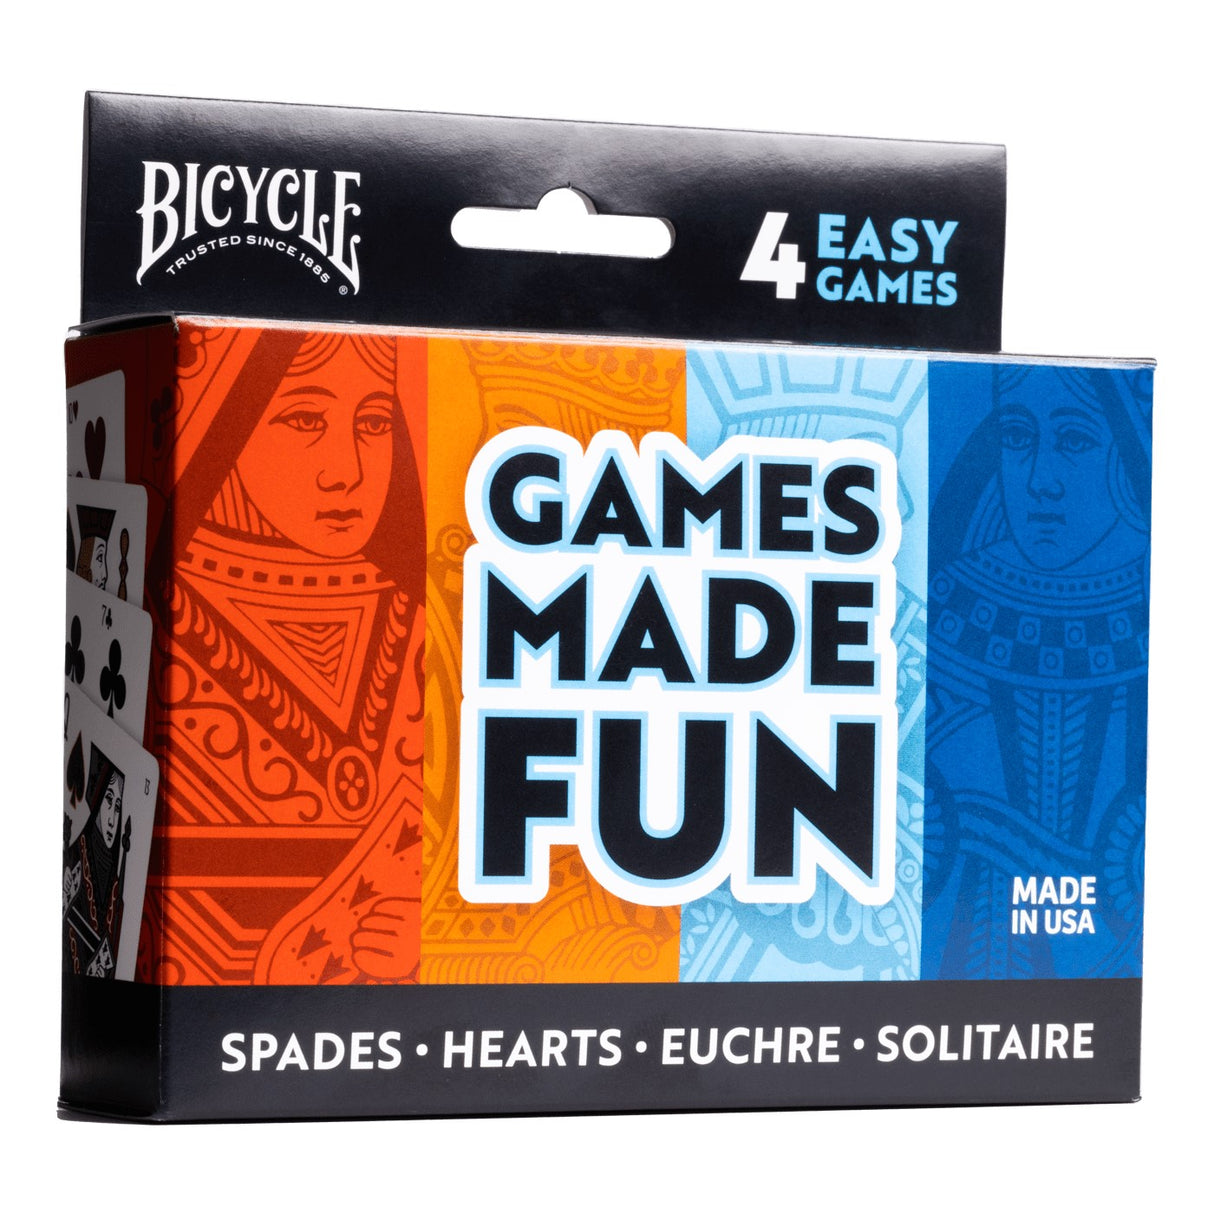 Bicycle 4 Games Pack - Hearts Spades Euchre and Solitaire